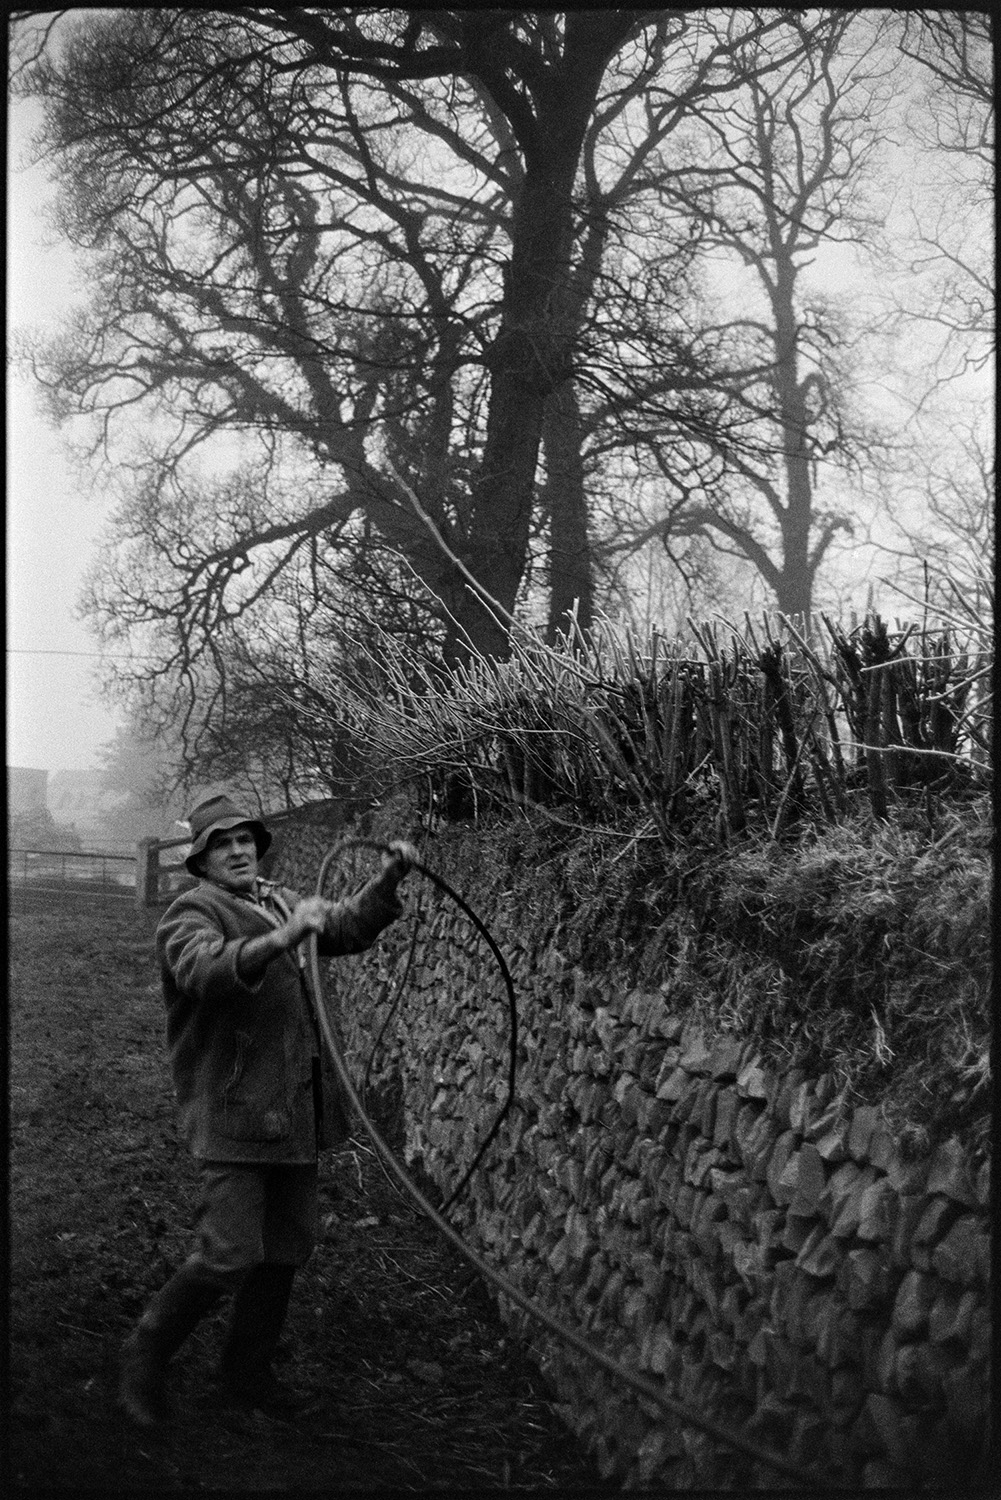 Farmer moving hose beside dry stone wall in front of elm trees. 
[Alf Pugsley moving a hose in front of a dry stone wall in the farmyard at Lower Langham, Dolton. Elm trees can be seen in the background.]